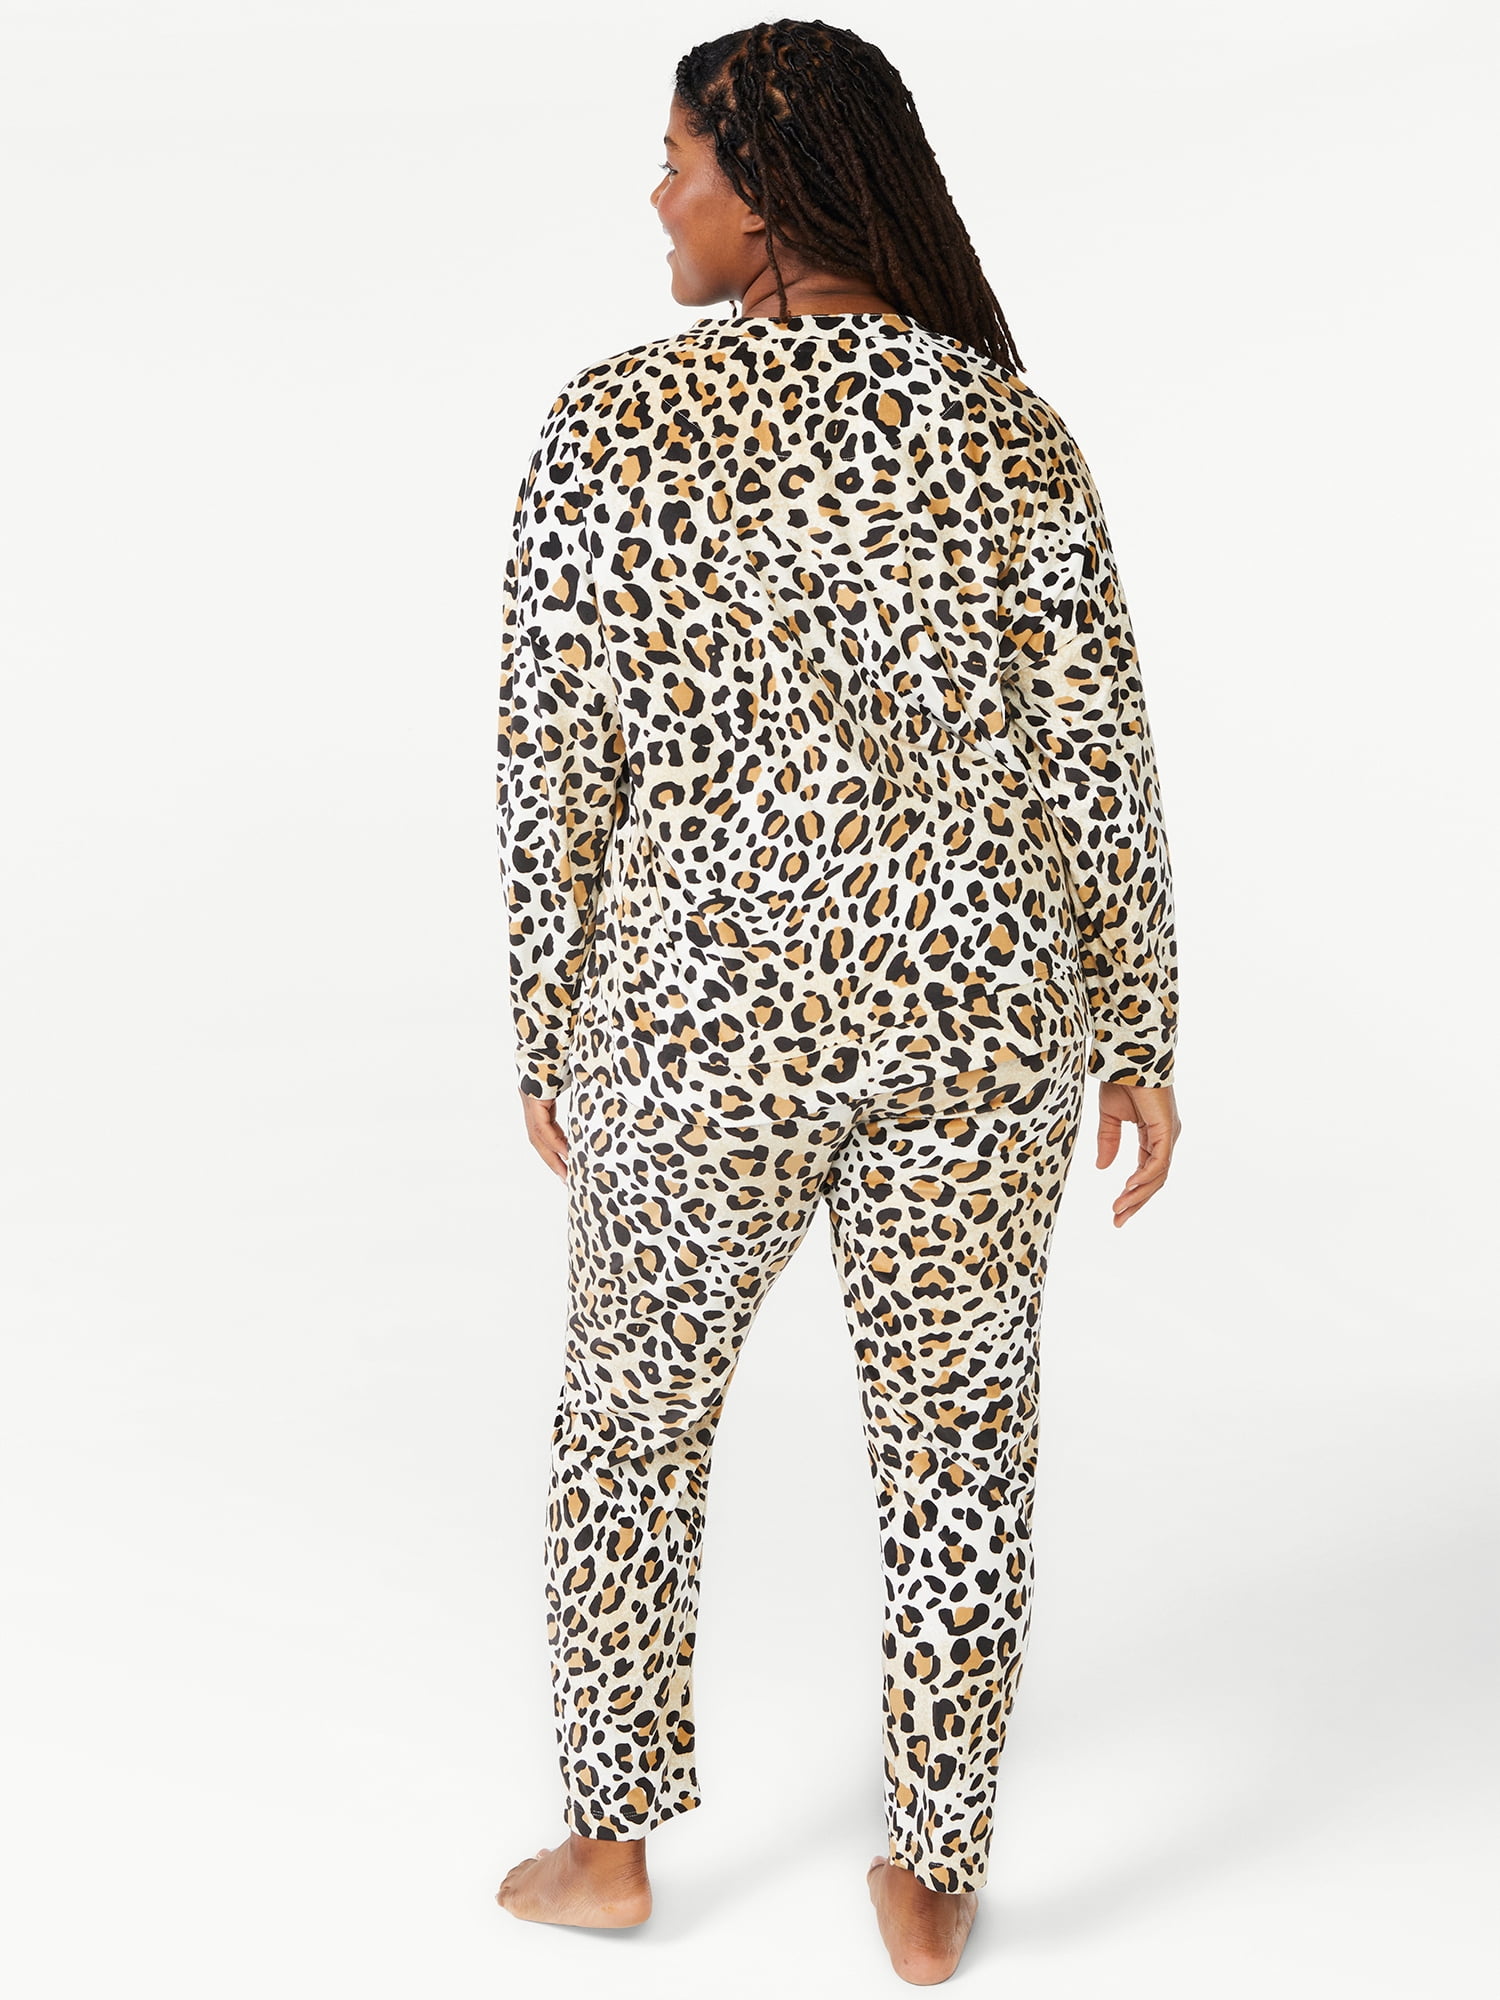 ShoSho One Piece Pajamas Size M Animal Print Skulls Long Sleeve-Soft•NWT  for Sale in Tacoma, WA - OfferUp